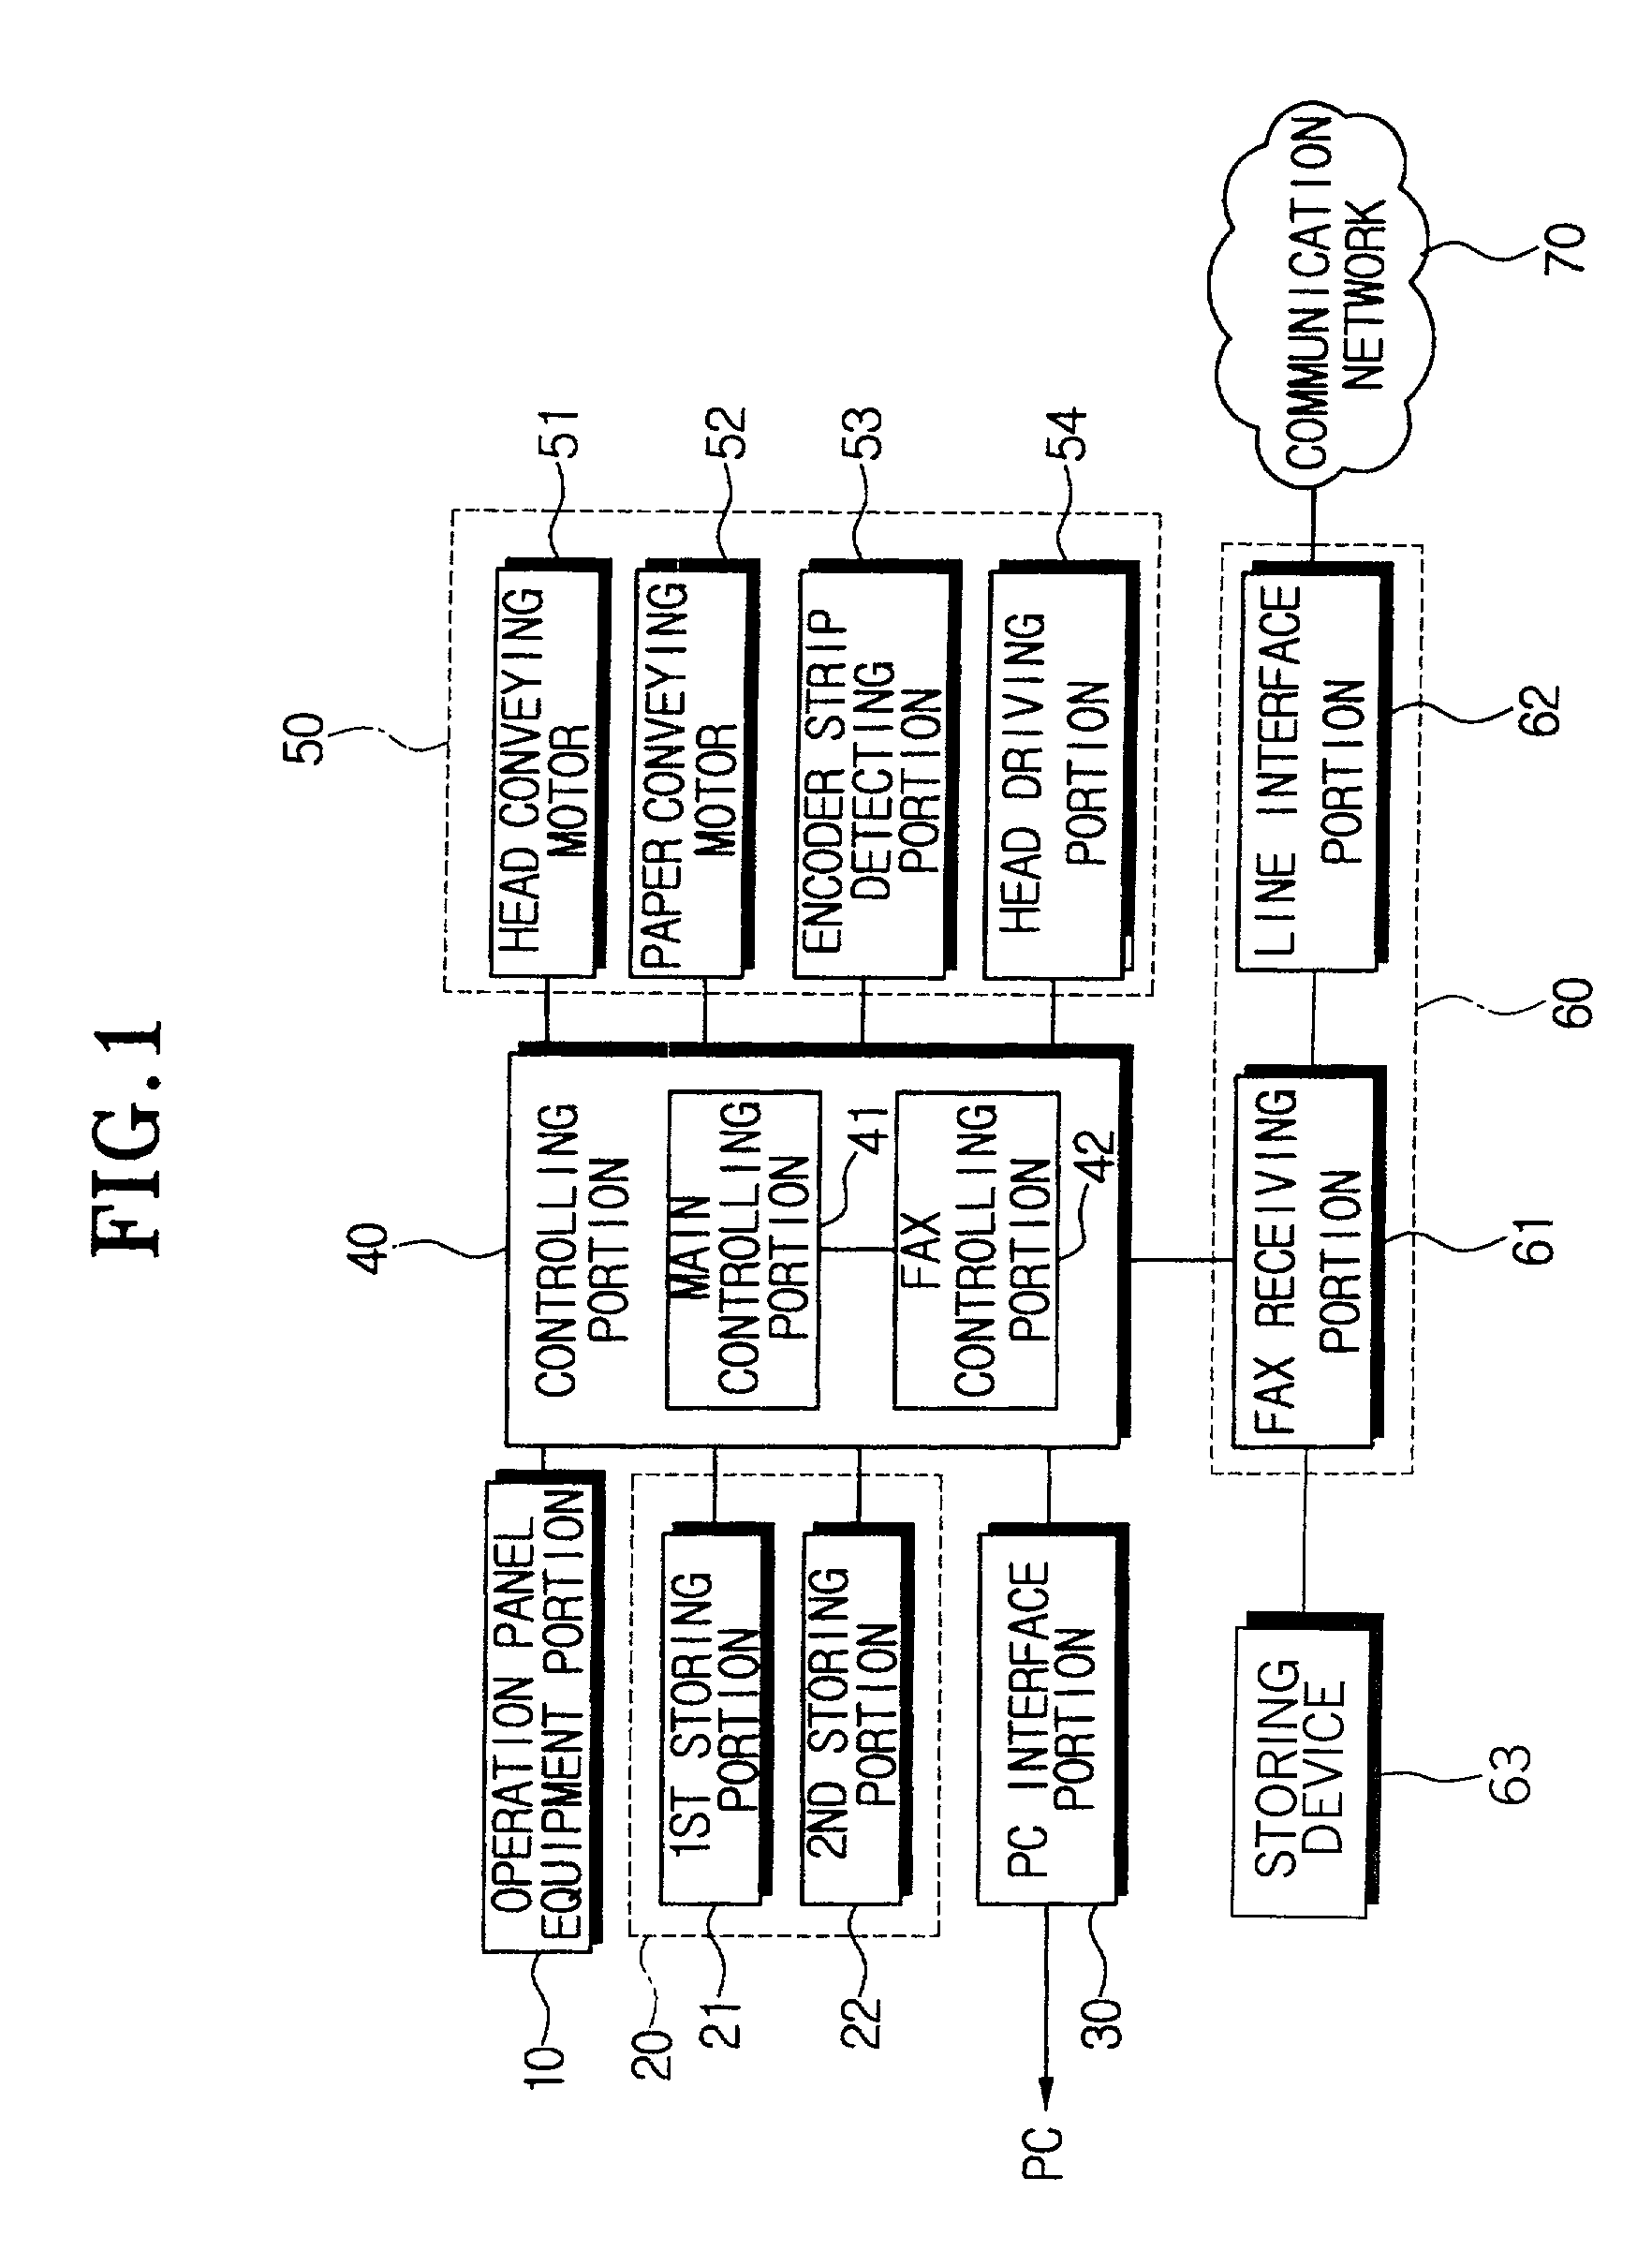 Printer with facsimile function capable of selectively printing fax data and selective printing method thereof